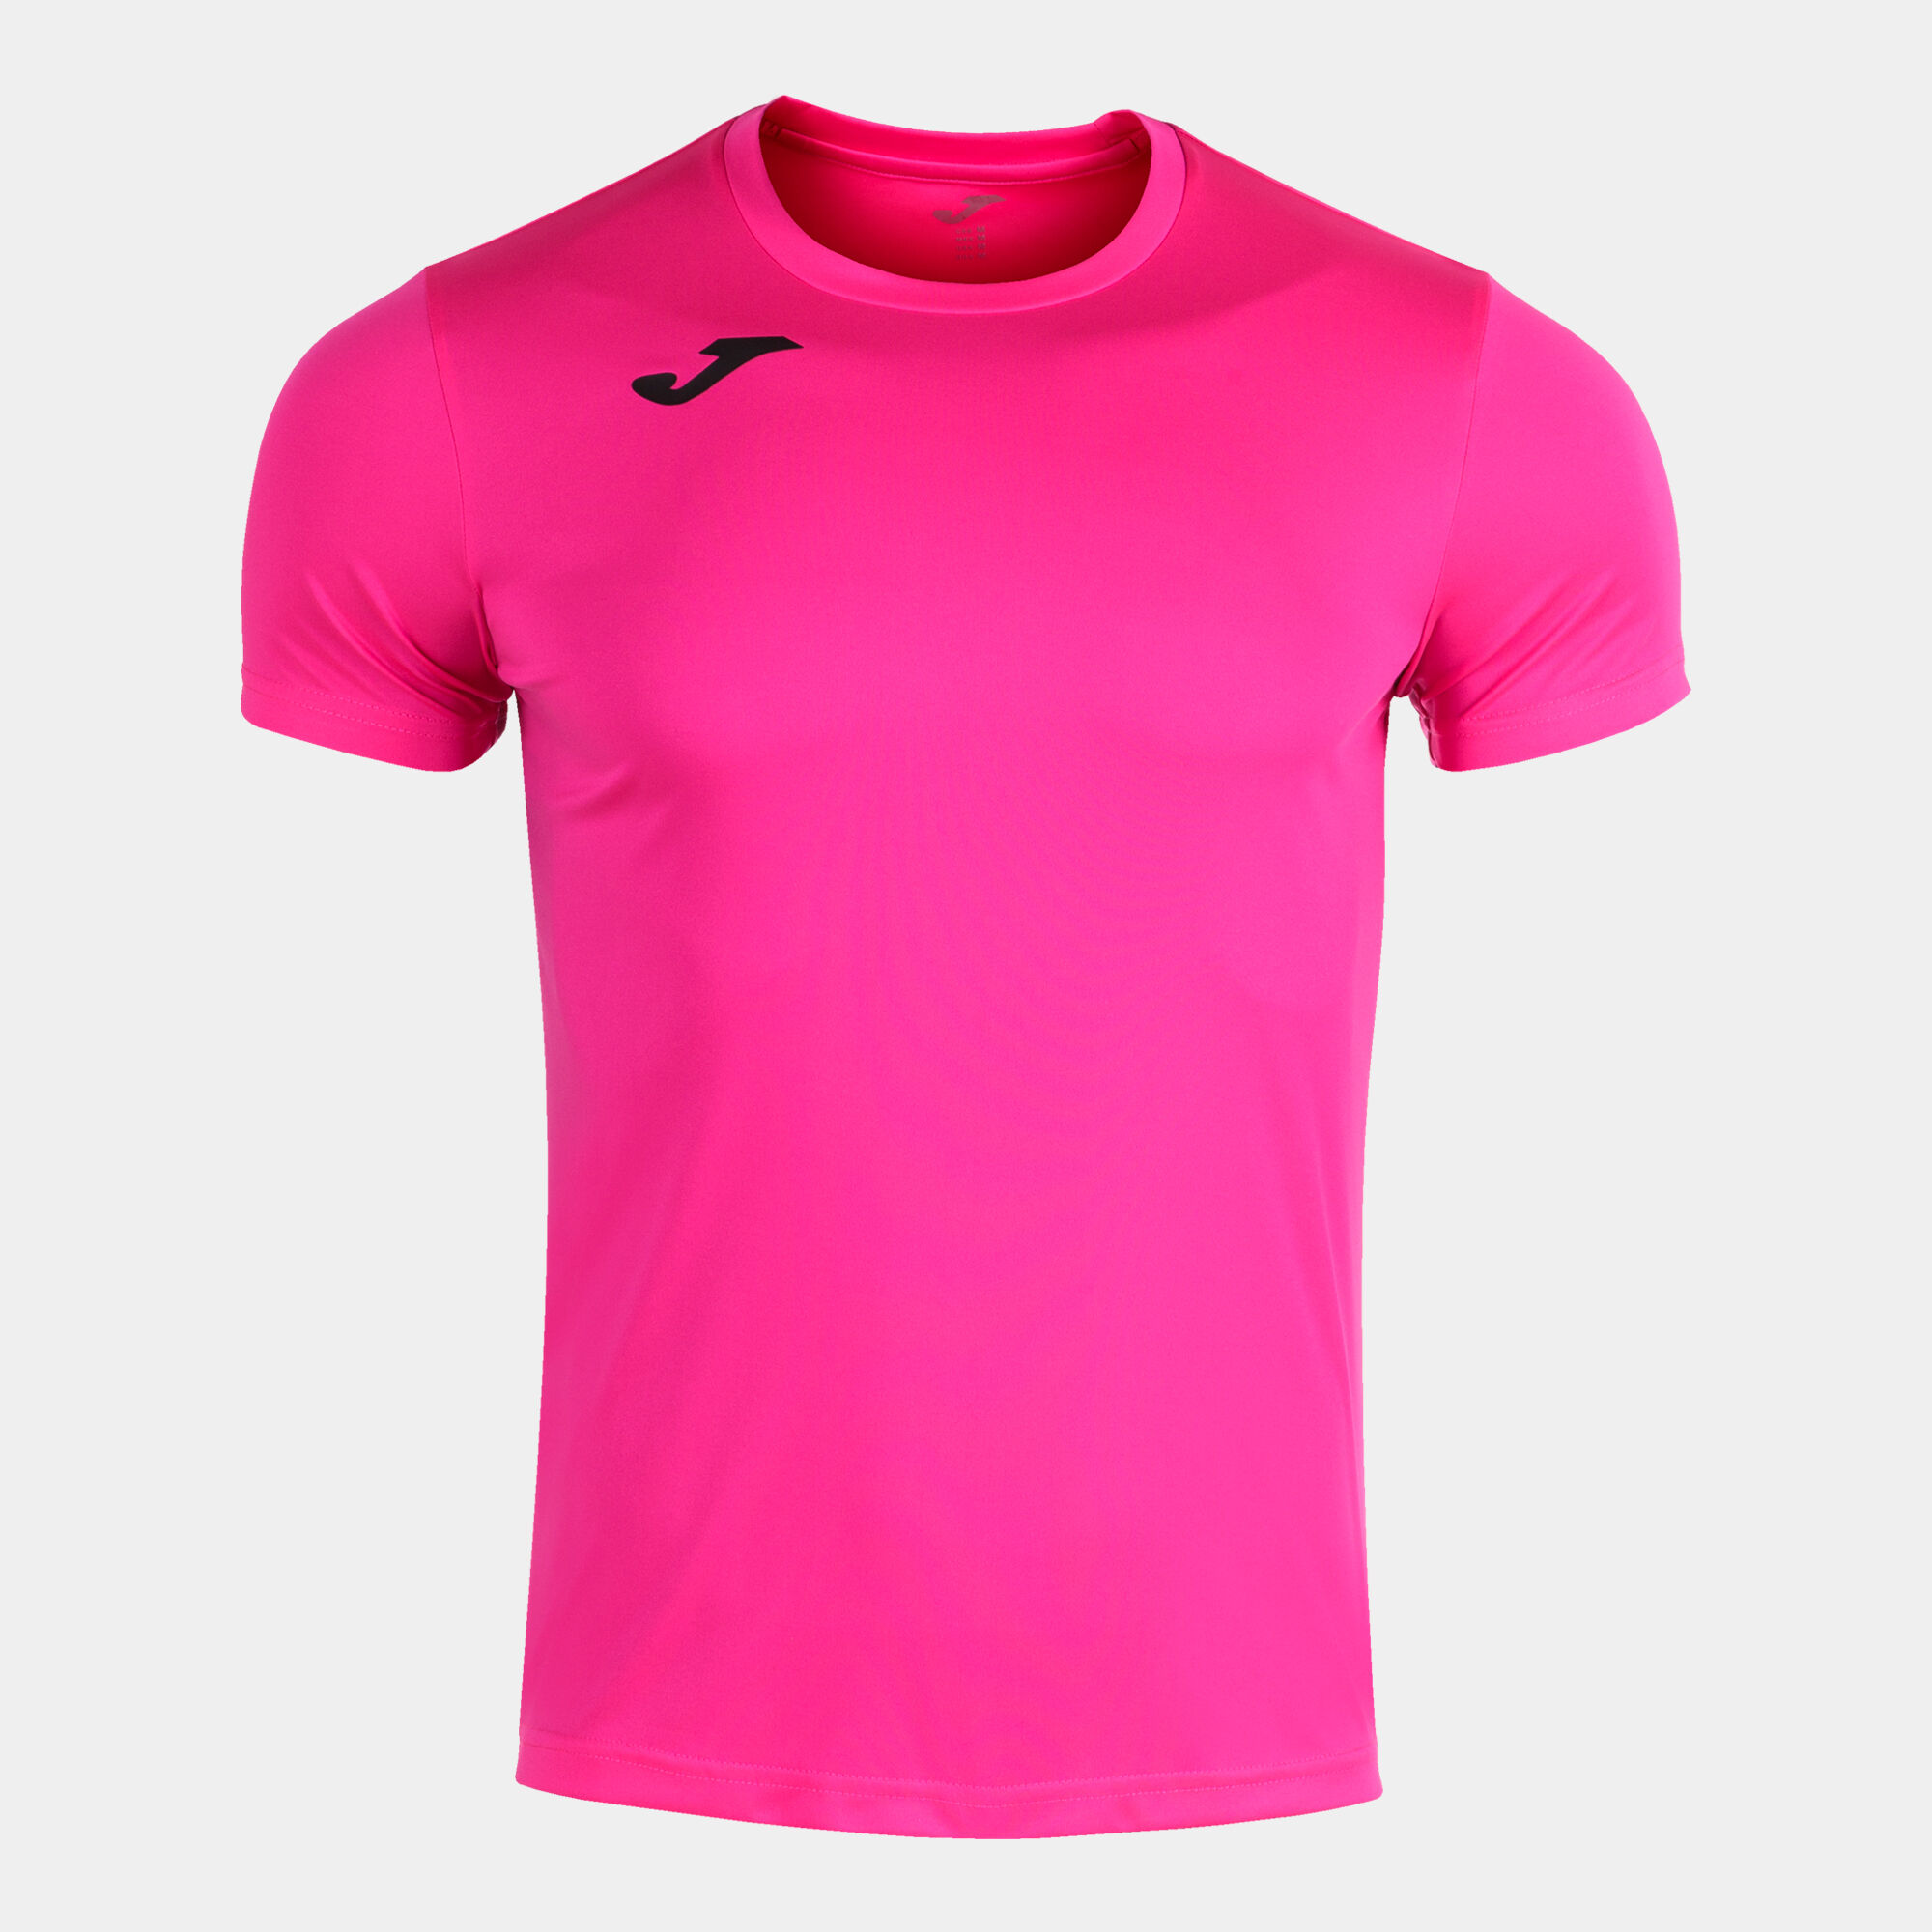 Maillot manches courtes homme Record II rose fluo